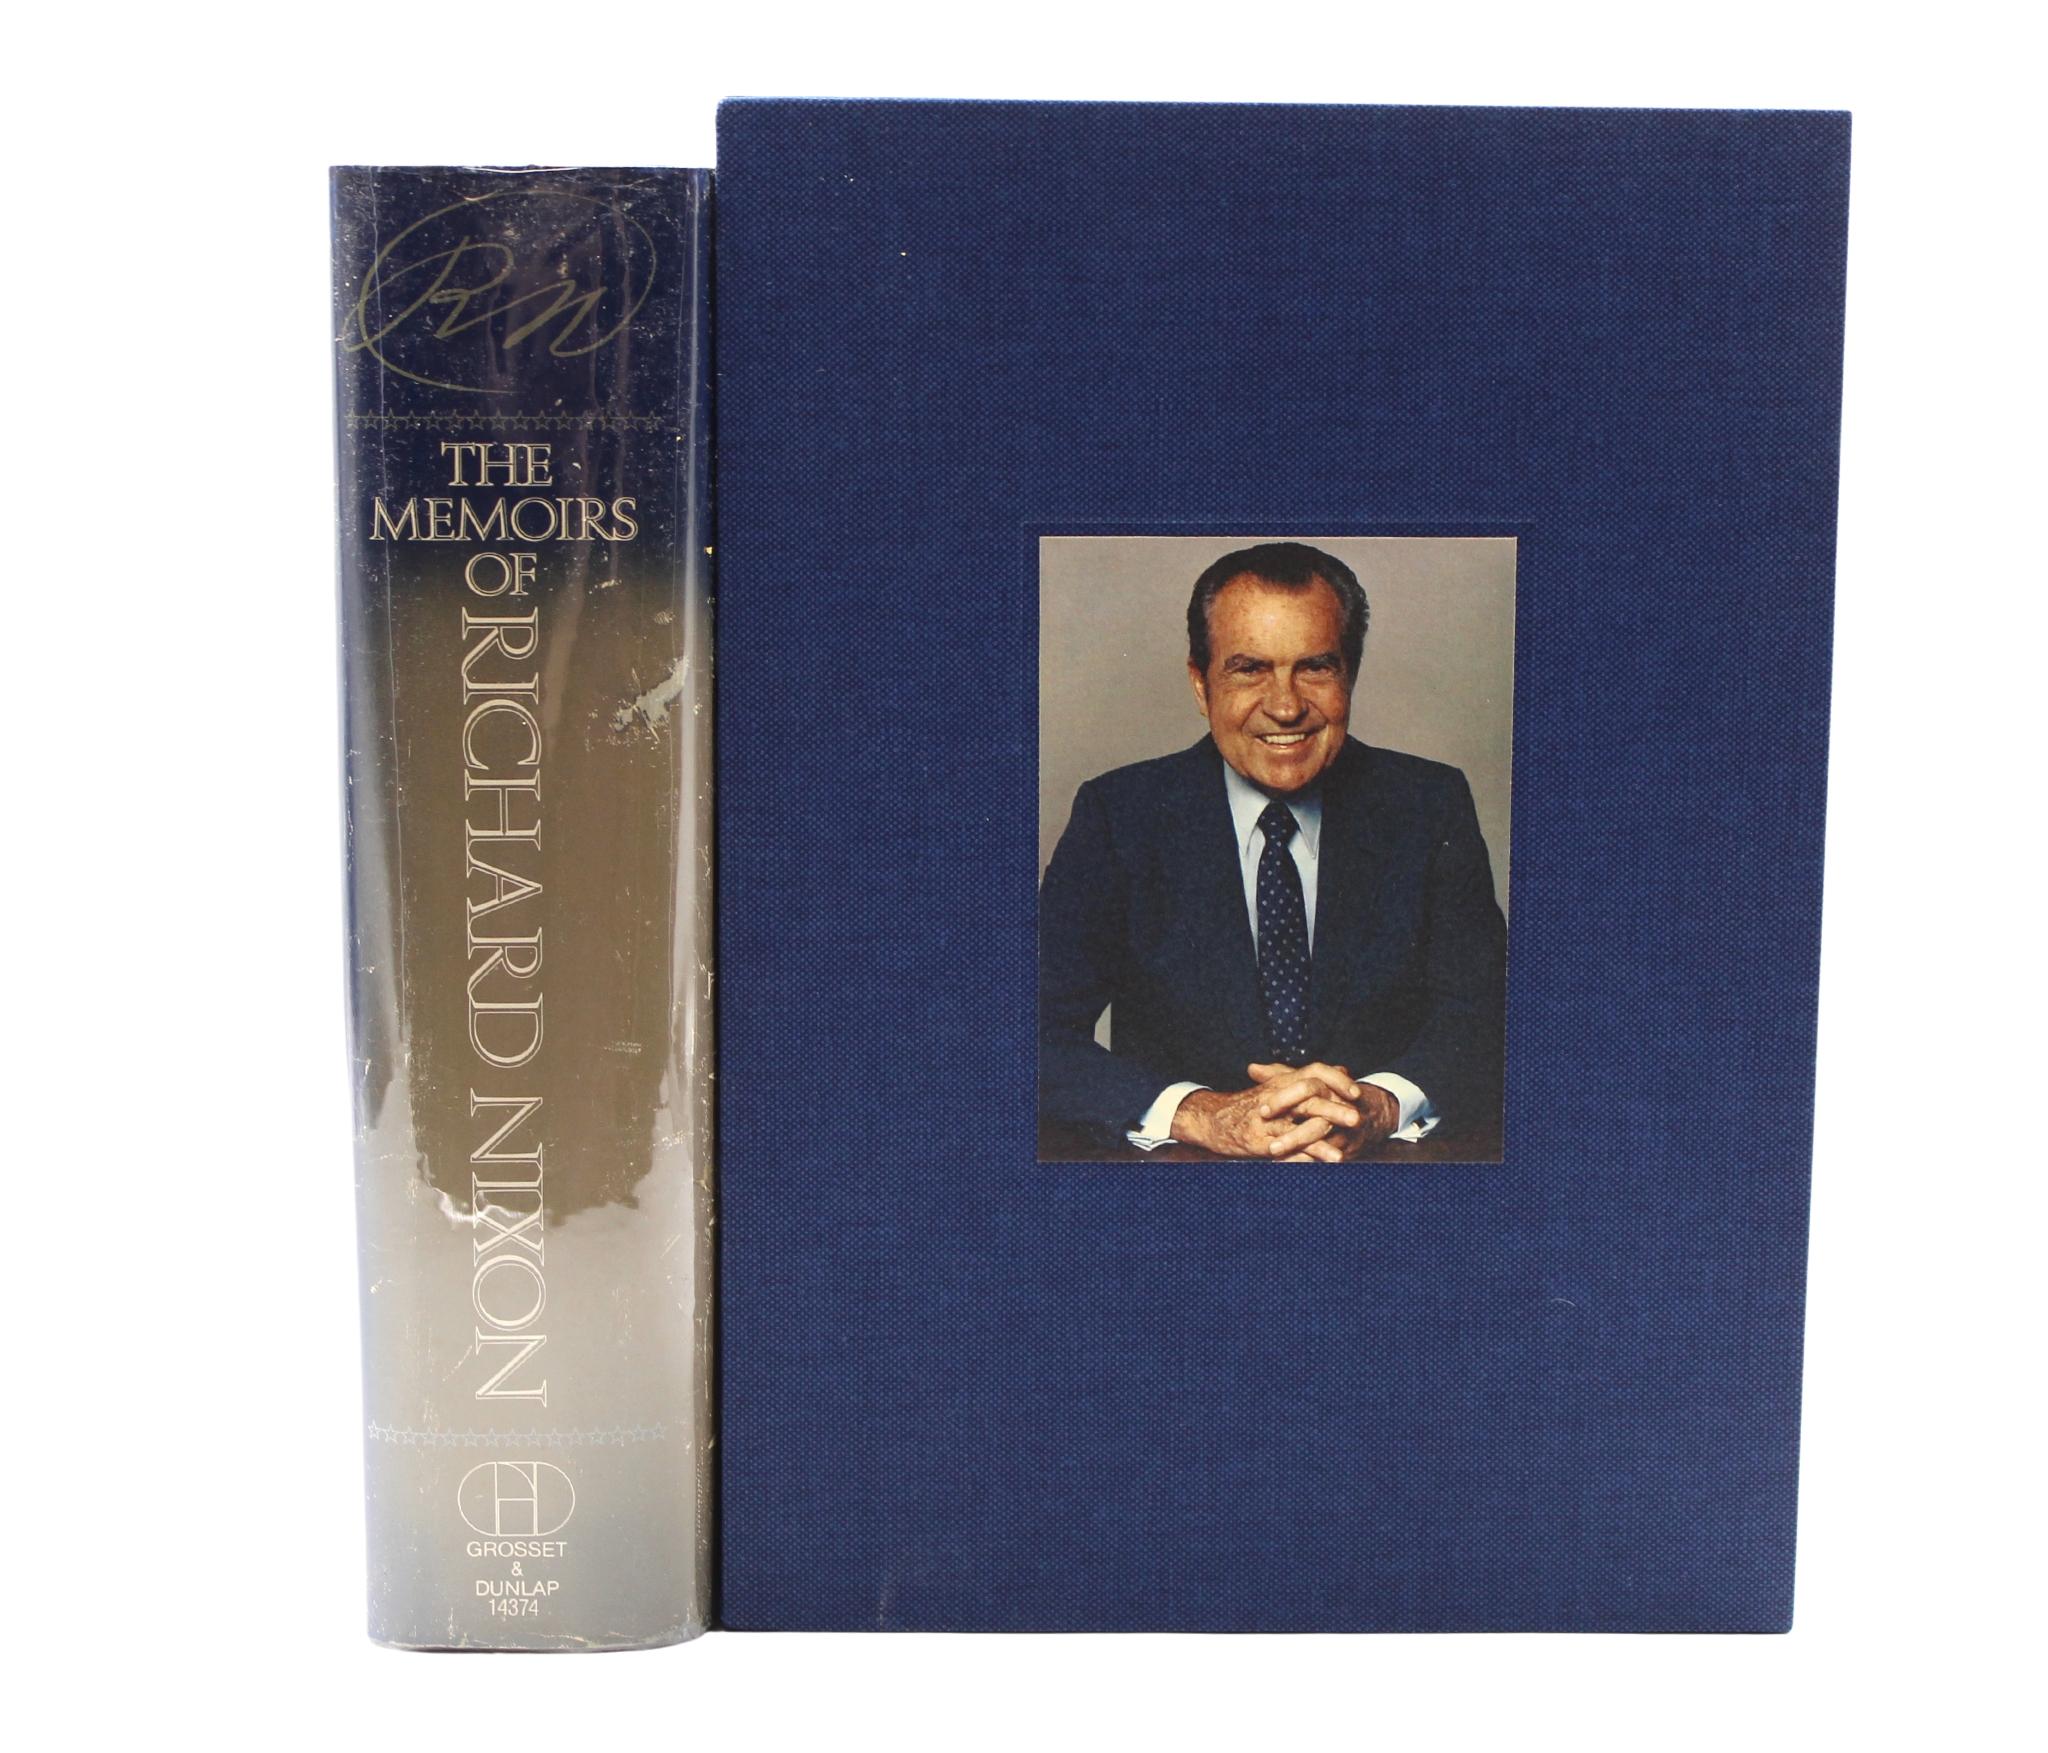 Nixon, Richard. The Memoirs of Richard Nixon. New York: Grosset & Dunlap, 1978. First Edition. Signed and inscribed on a pasted down bookplate. In original dust jacket and boards. Presented with a new archival slipcase. 

Presented is a first